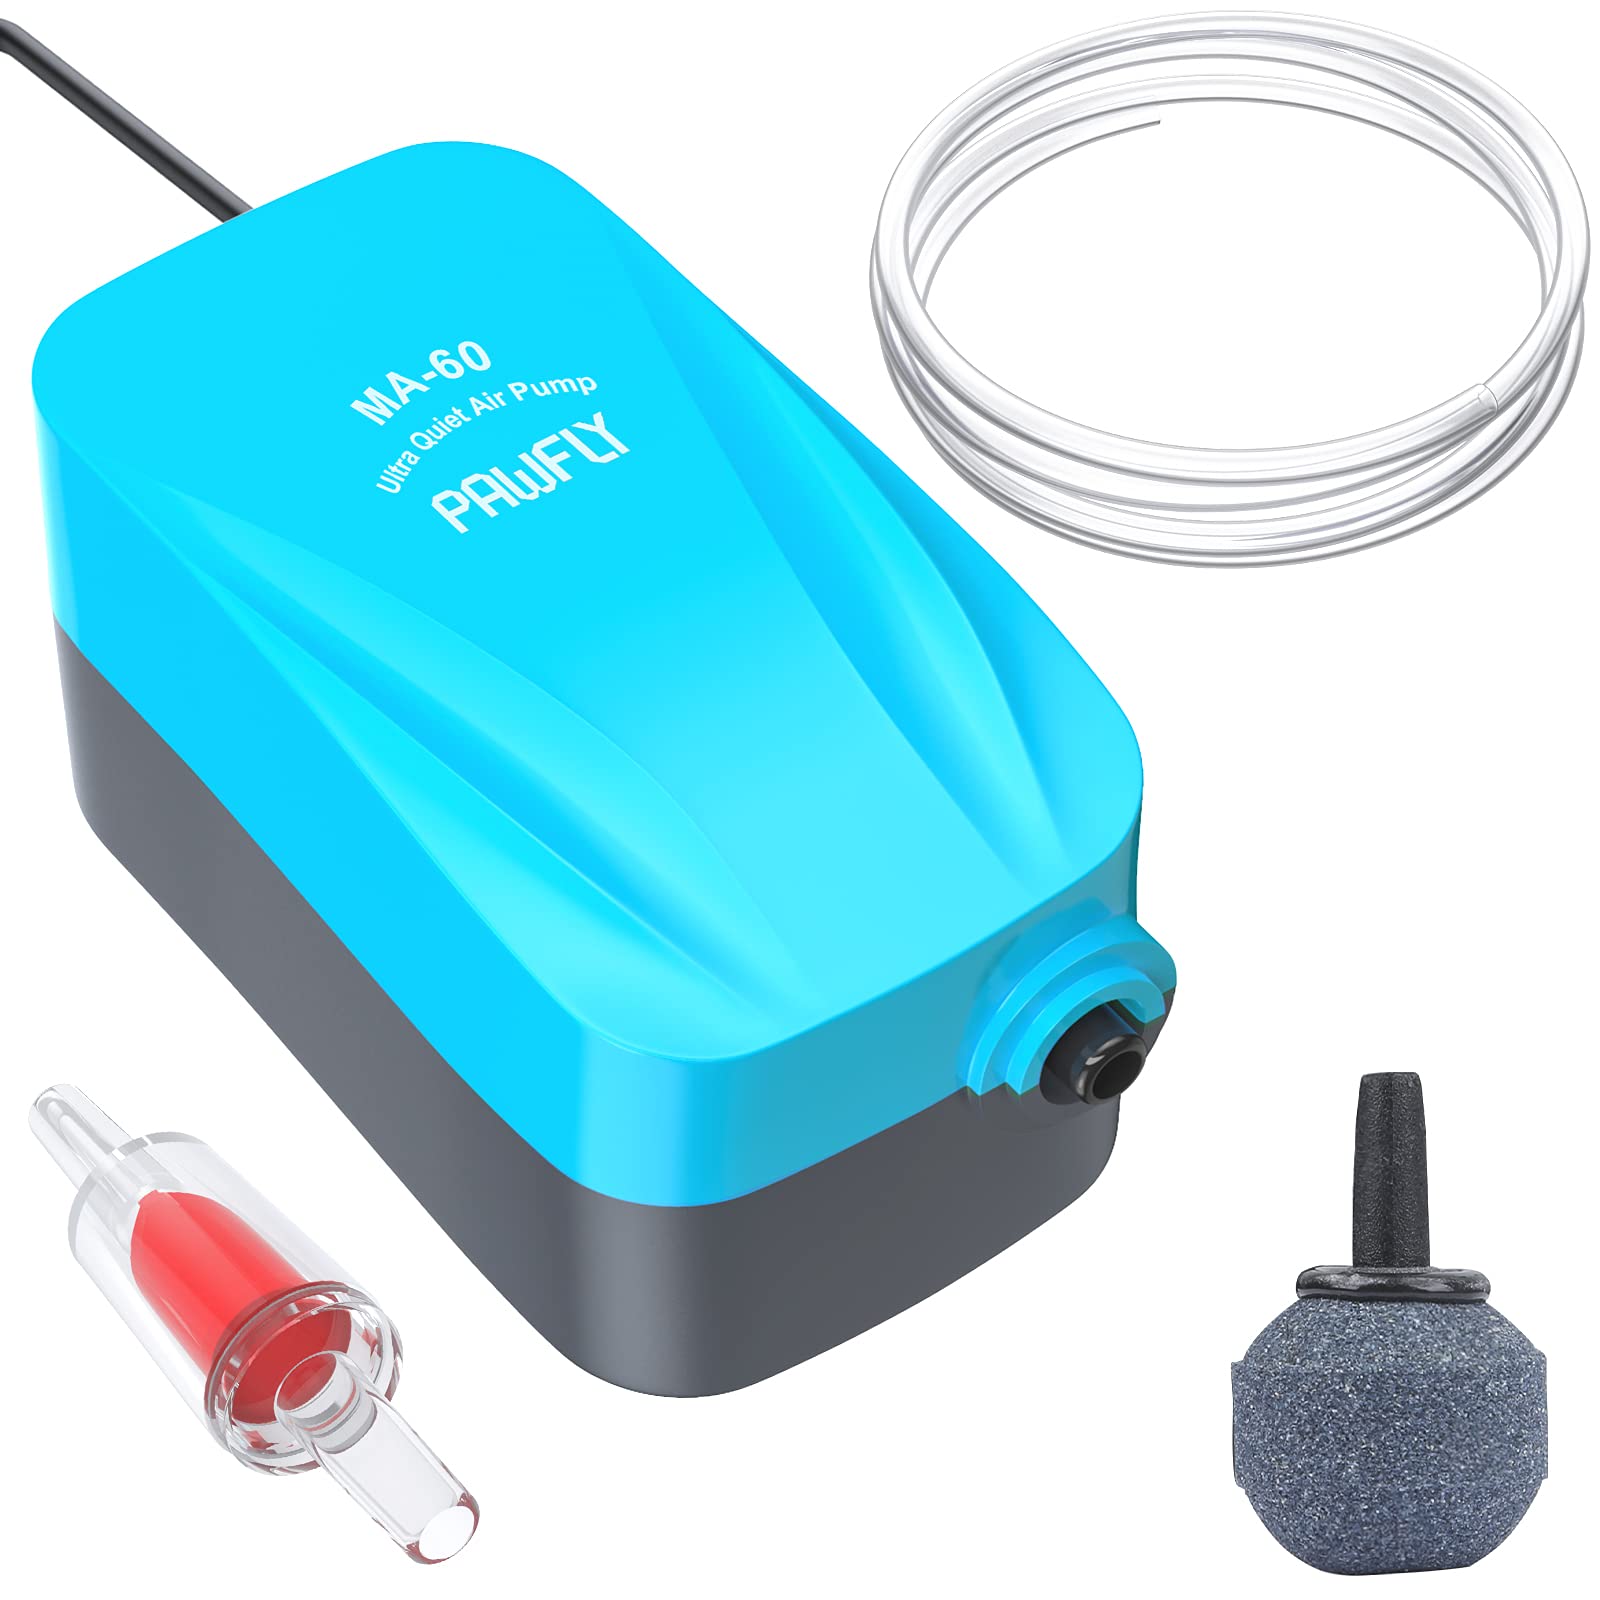 Pawfly Aquarium 40 GPH Compact Air Pump Quiet Oxygen Aerator Pump with Air  Stone Airline Tubing and Check Valve Accessories for 5 - 20 Gallon Buckets  and Fish Tanks